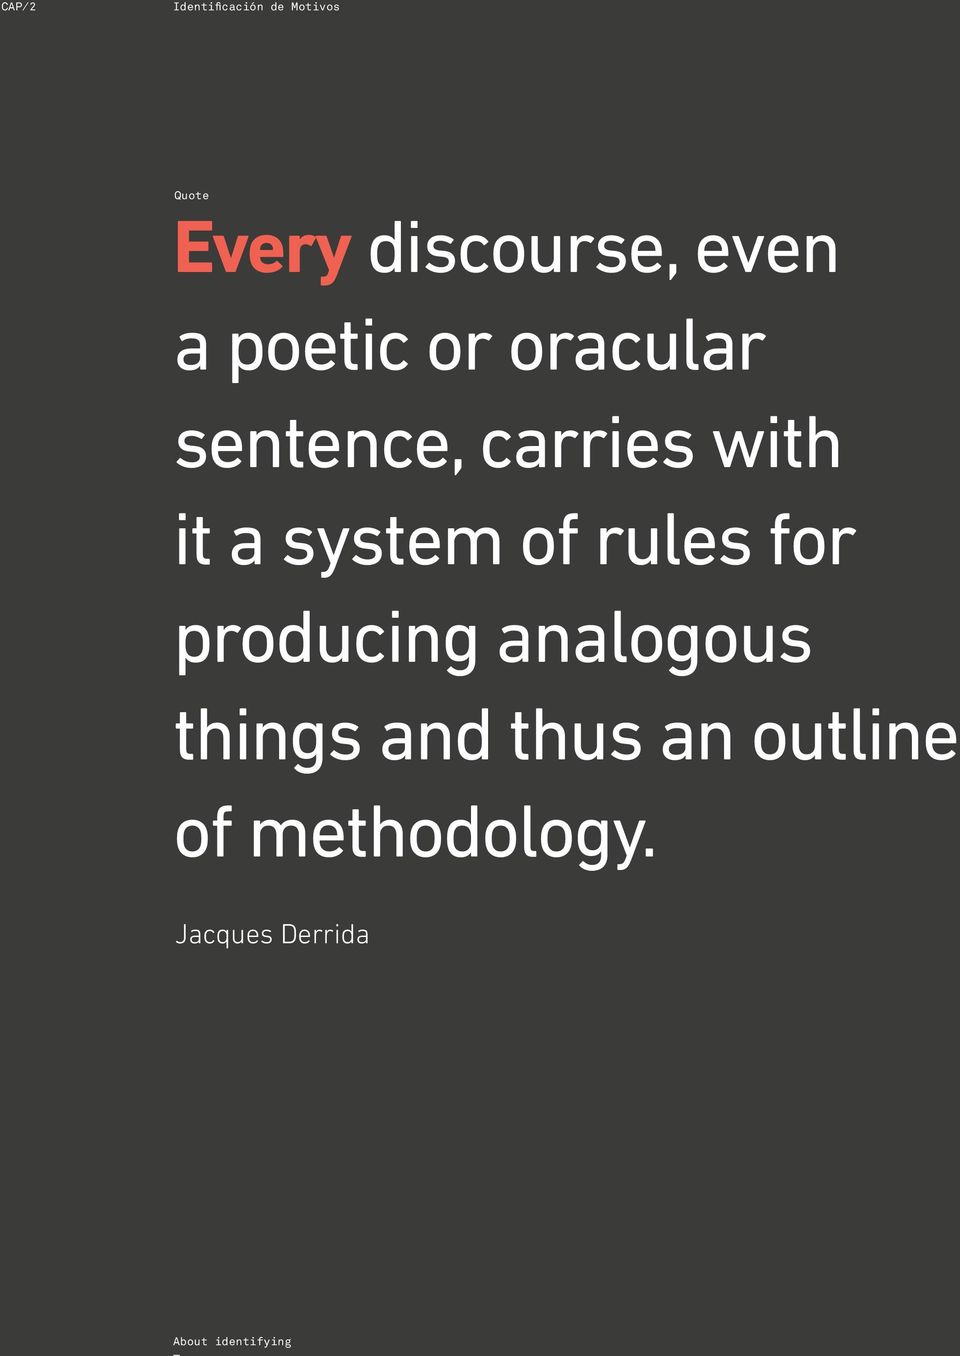 system of rules for producing analogous things and thus